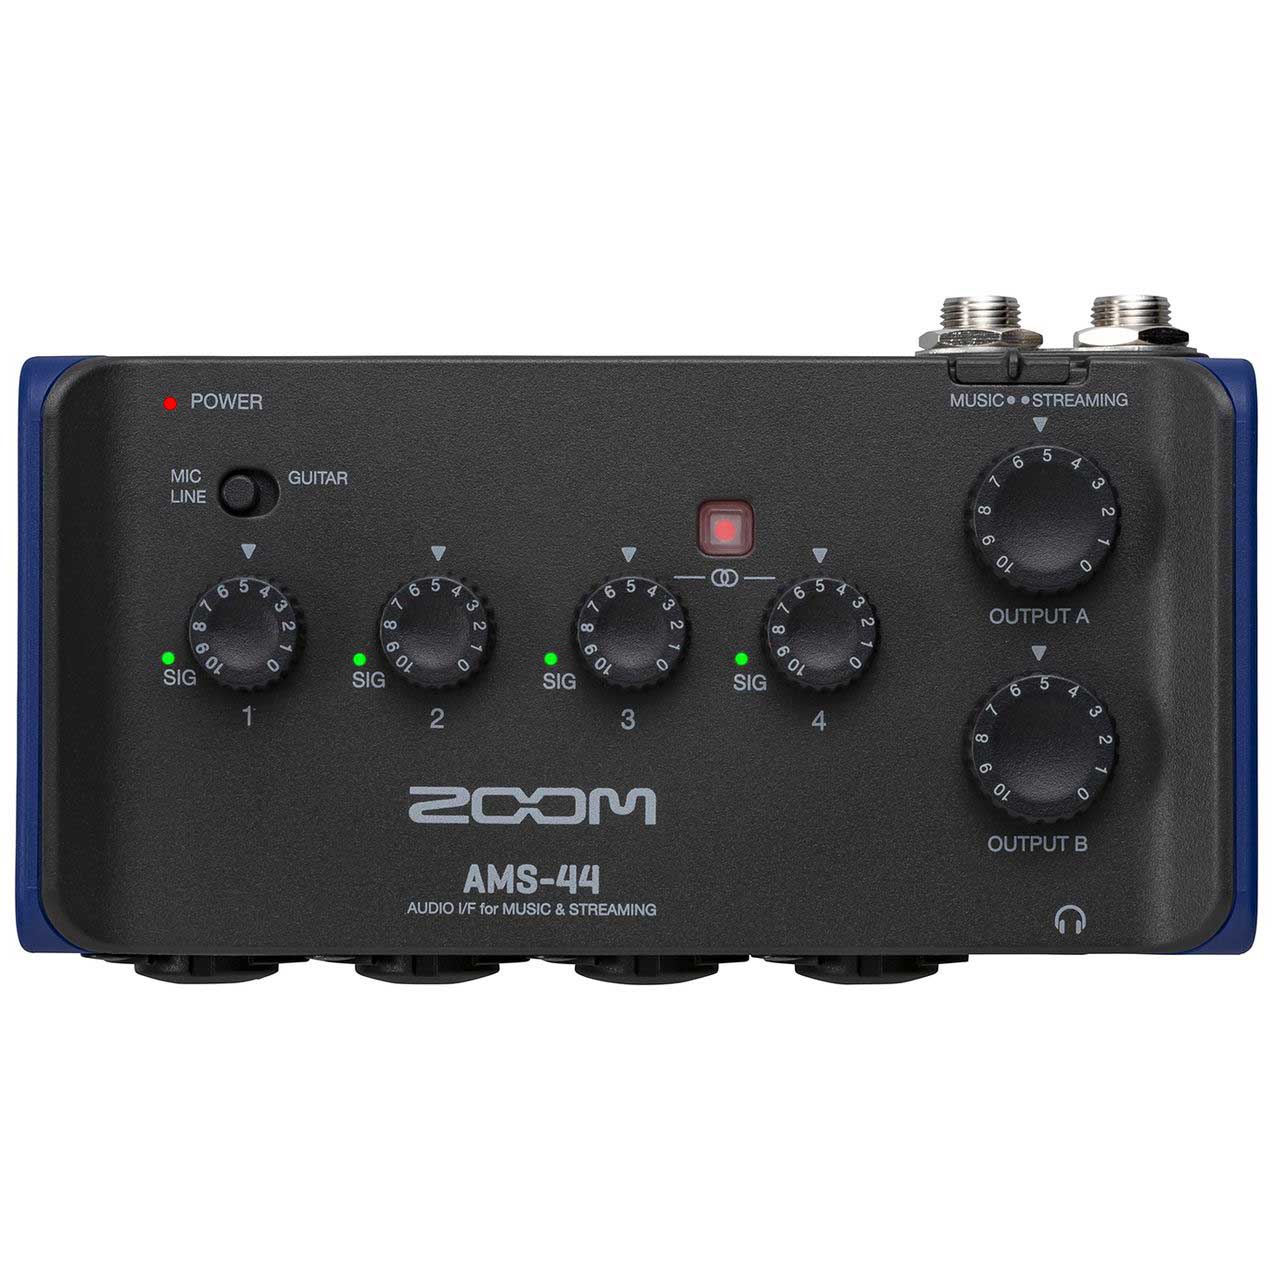 Pre-Owned Zoom H6 Recorder with Case - Five Star Guitars